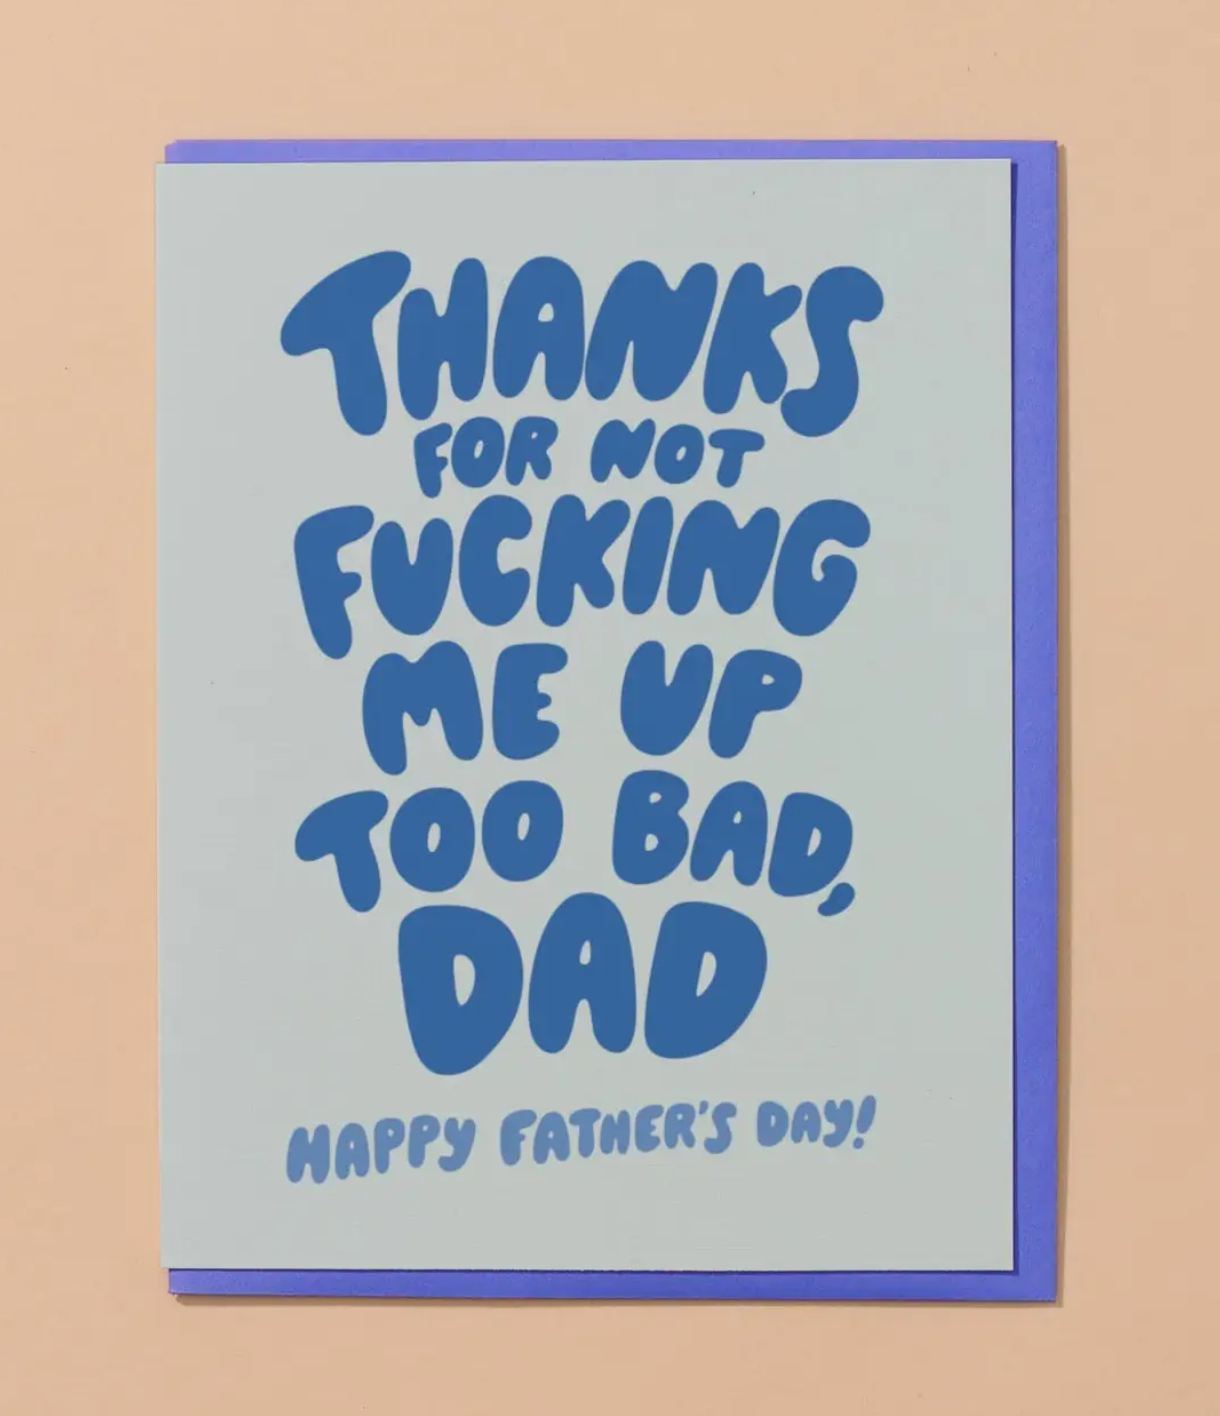 Thanks For Not Fucking Me Up Too Bad, Dad Card